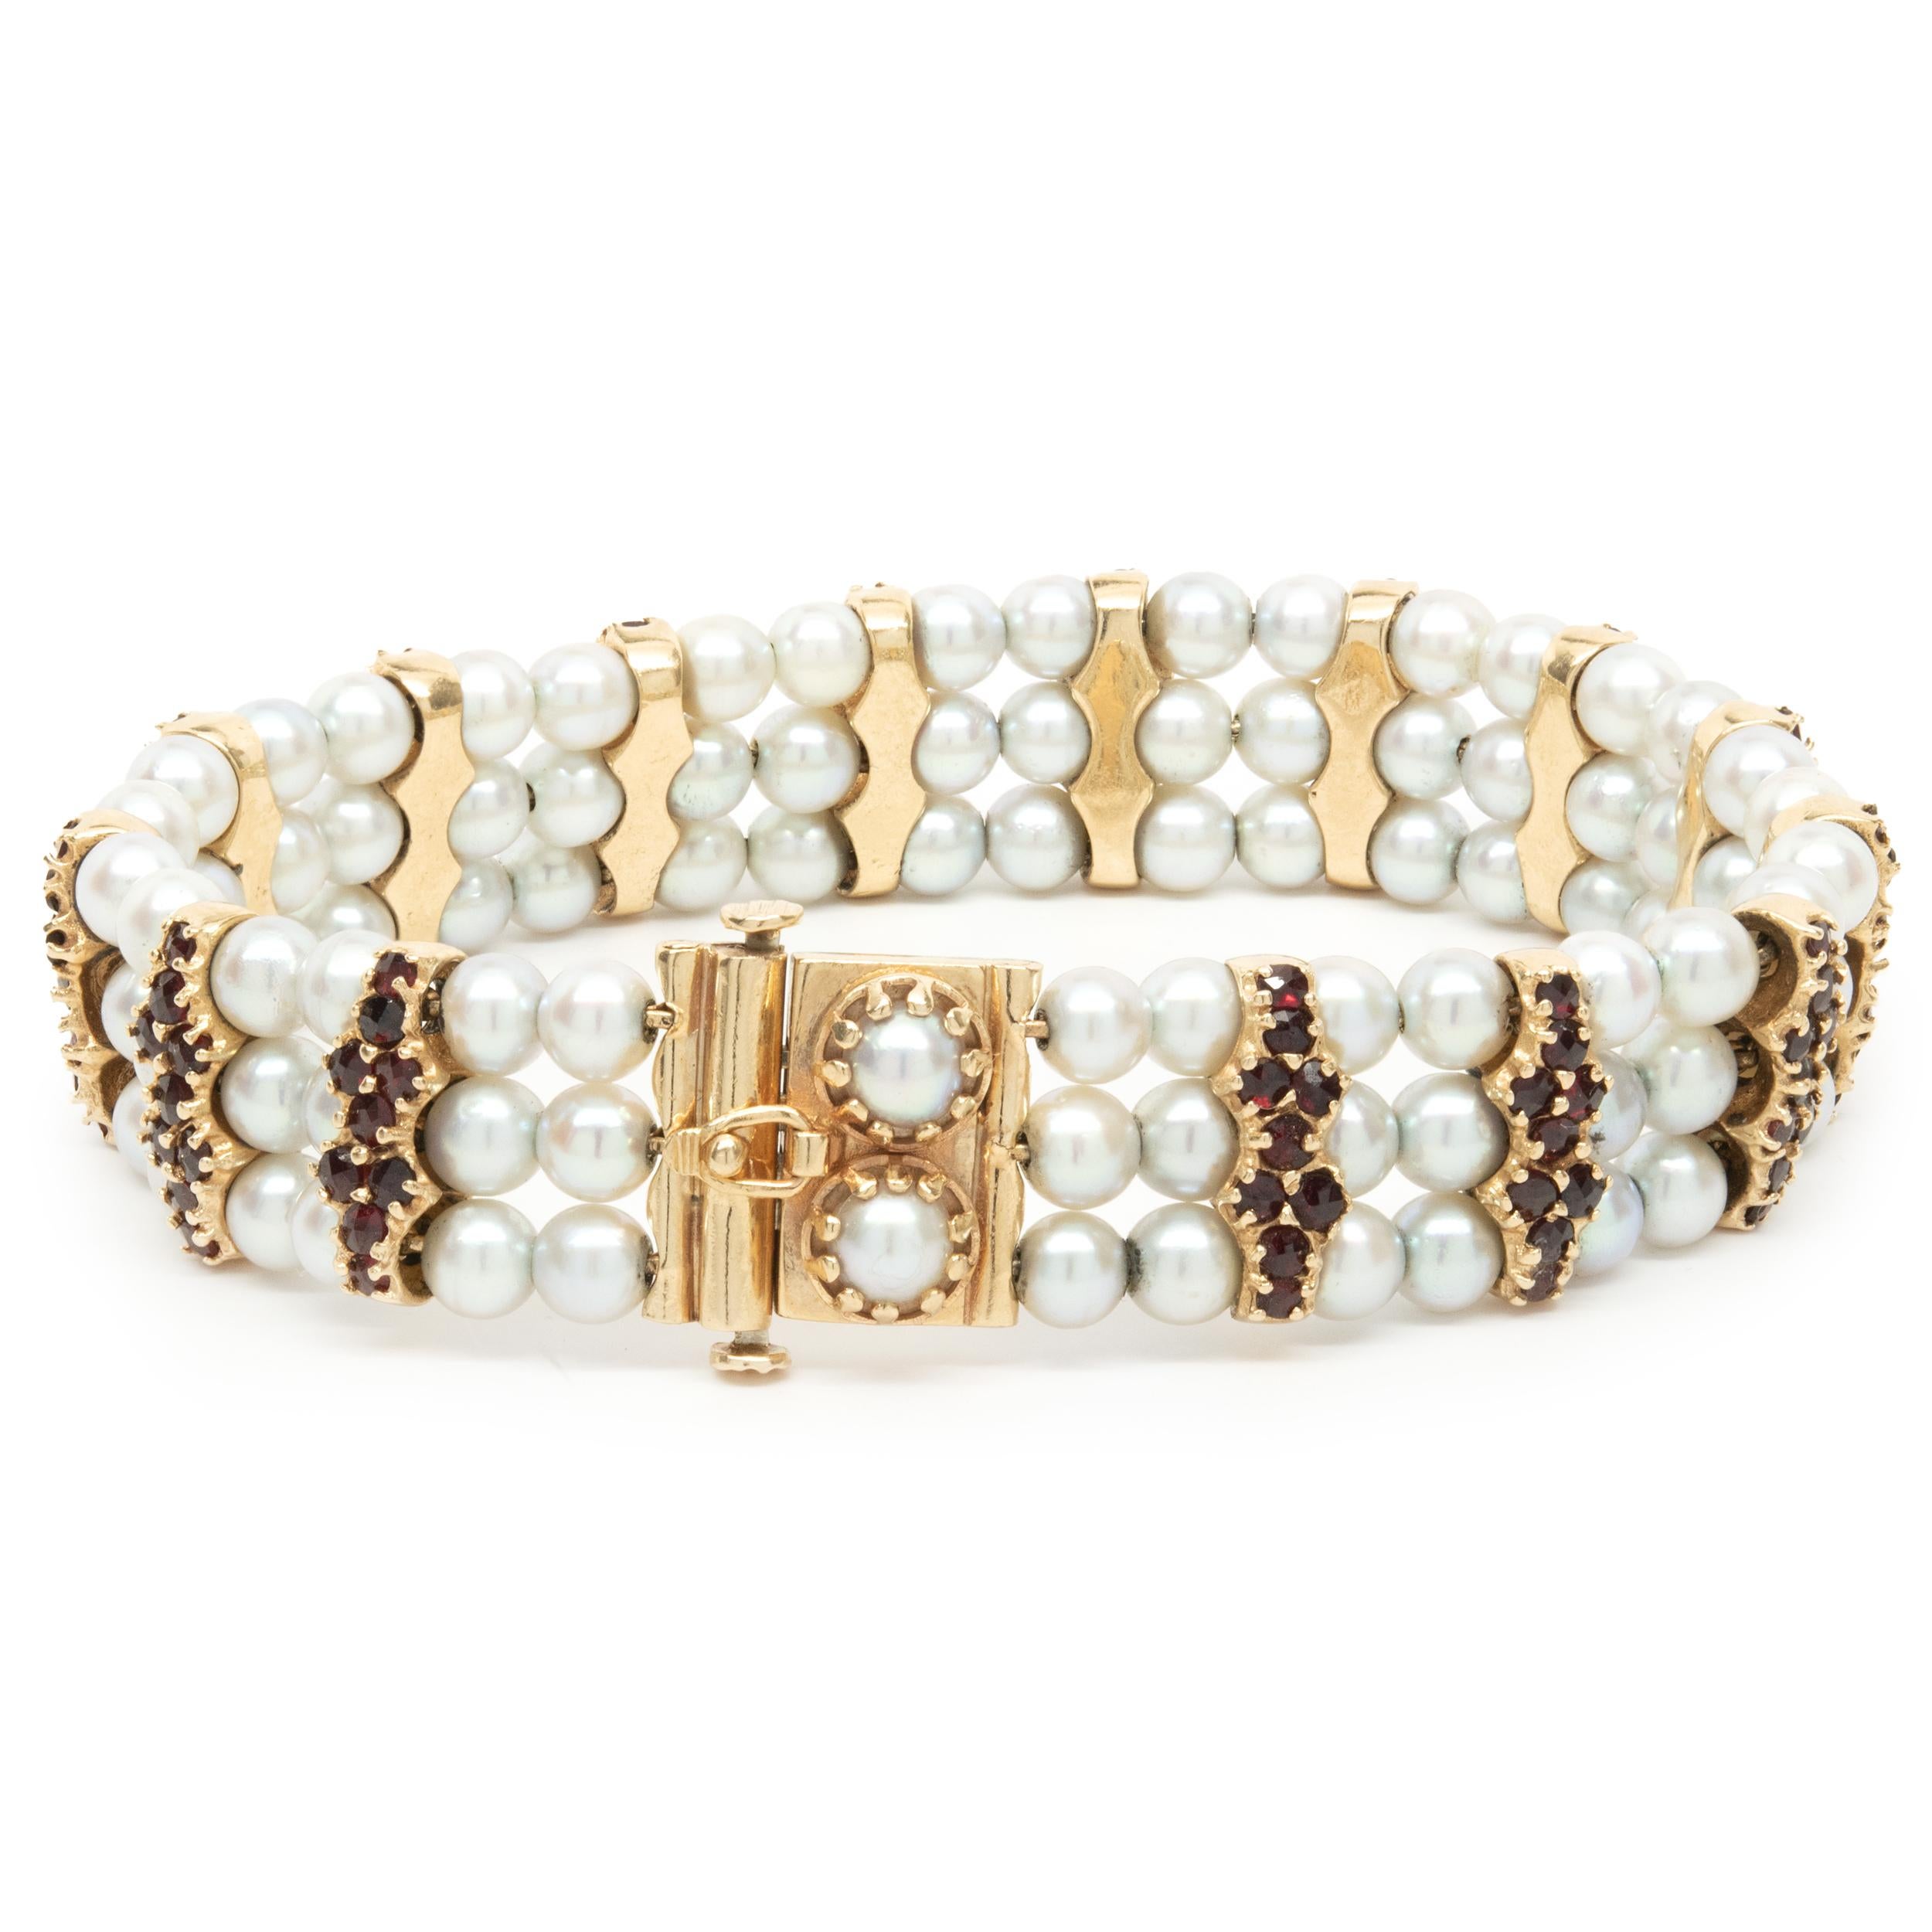 Designer: custom 
Material: 14K yellow gold
Dimensions: bracelet will fit up to a 7.25-inch wrist
Weight: 44.78 grams
